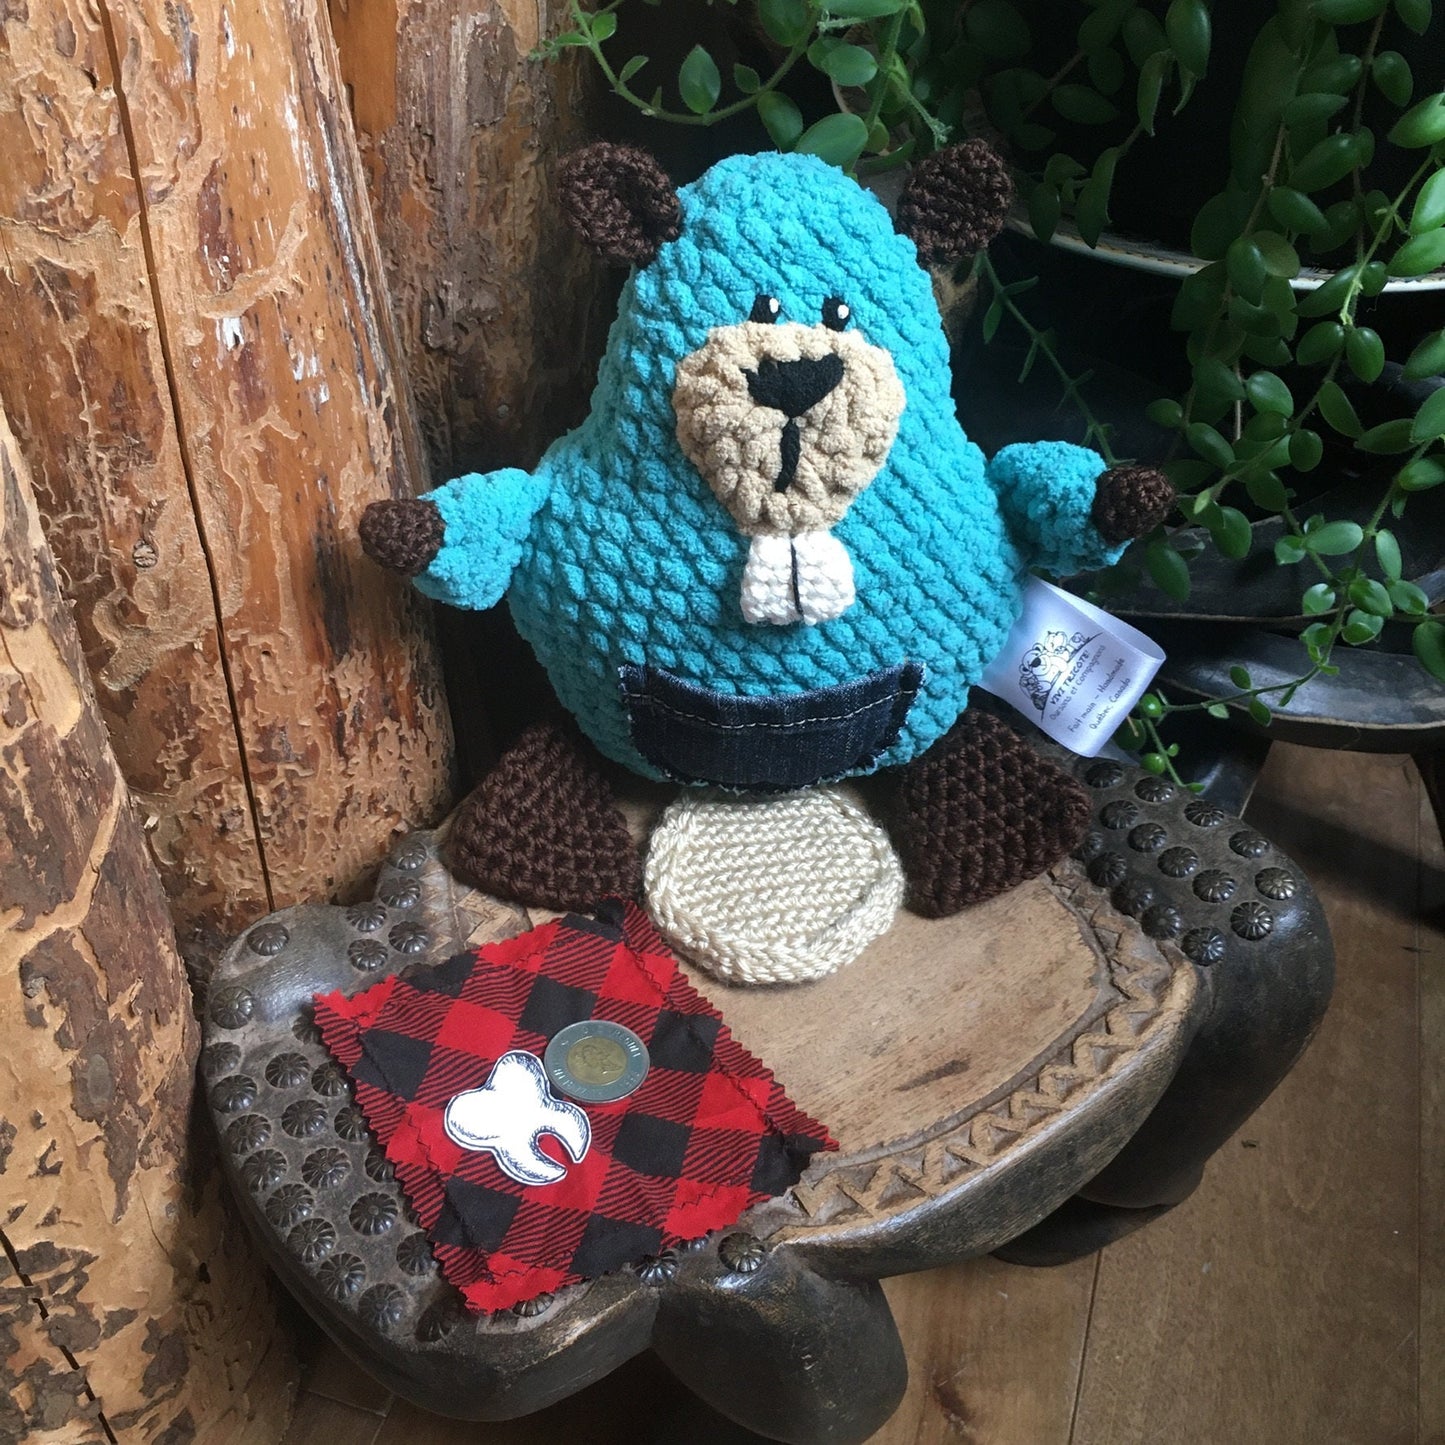 TIMÉO THE BABY BEAVER turquoise, beige and chocolate.  Tooth fairy friend, plush amigurumi stuffed animal from the boreal forest